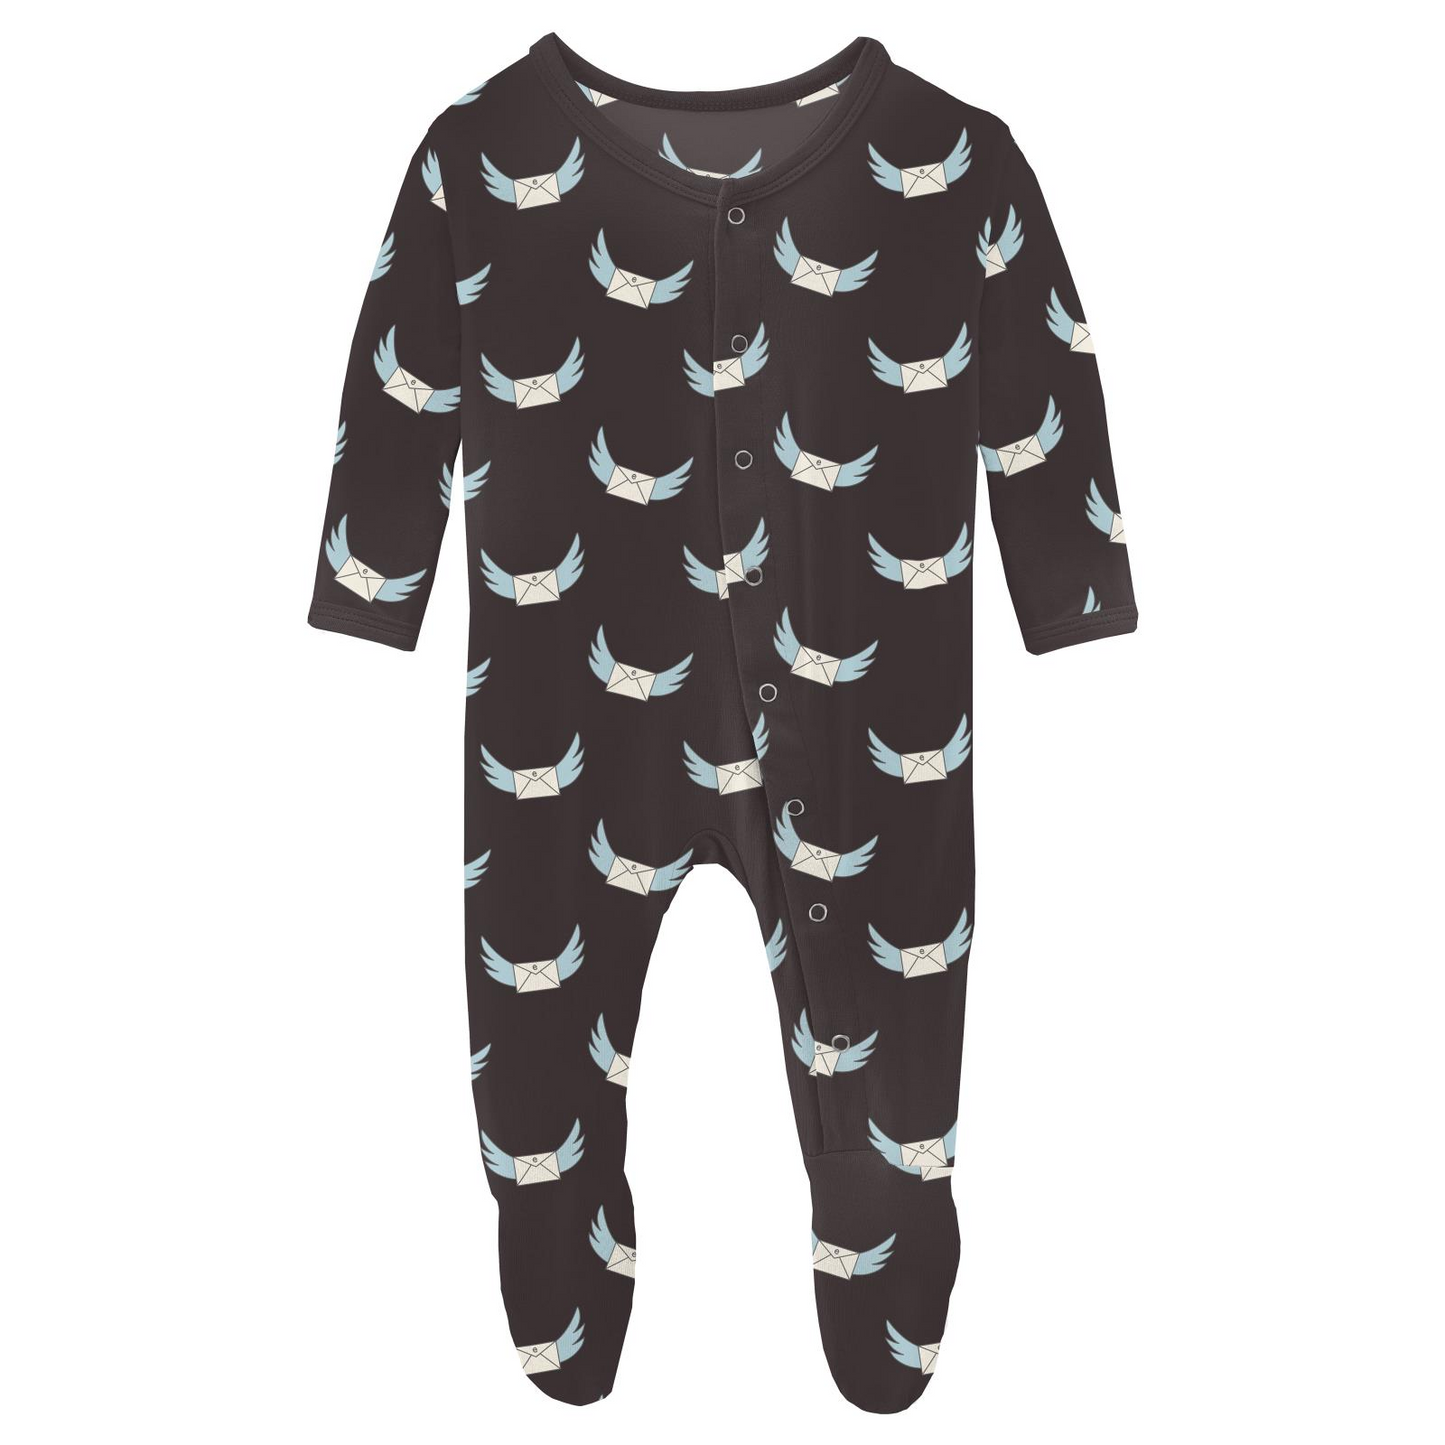 Kickee Pants Print Footie with Snaps: Midnight Email